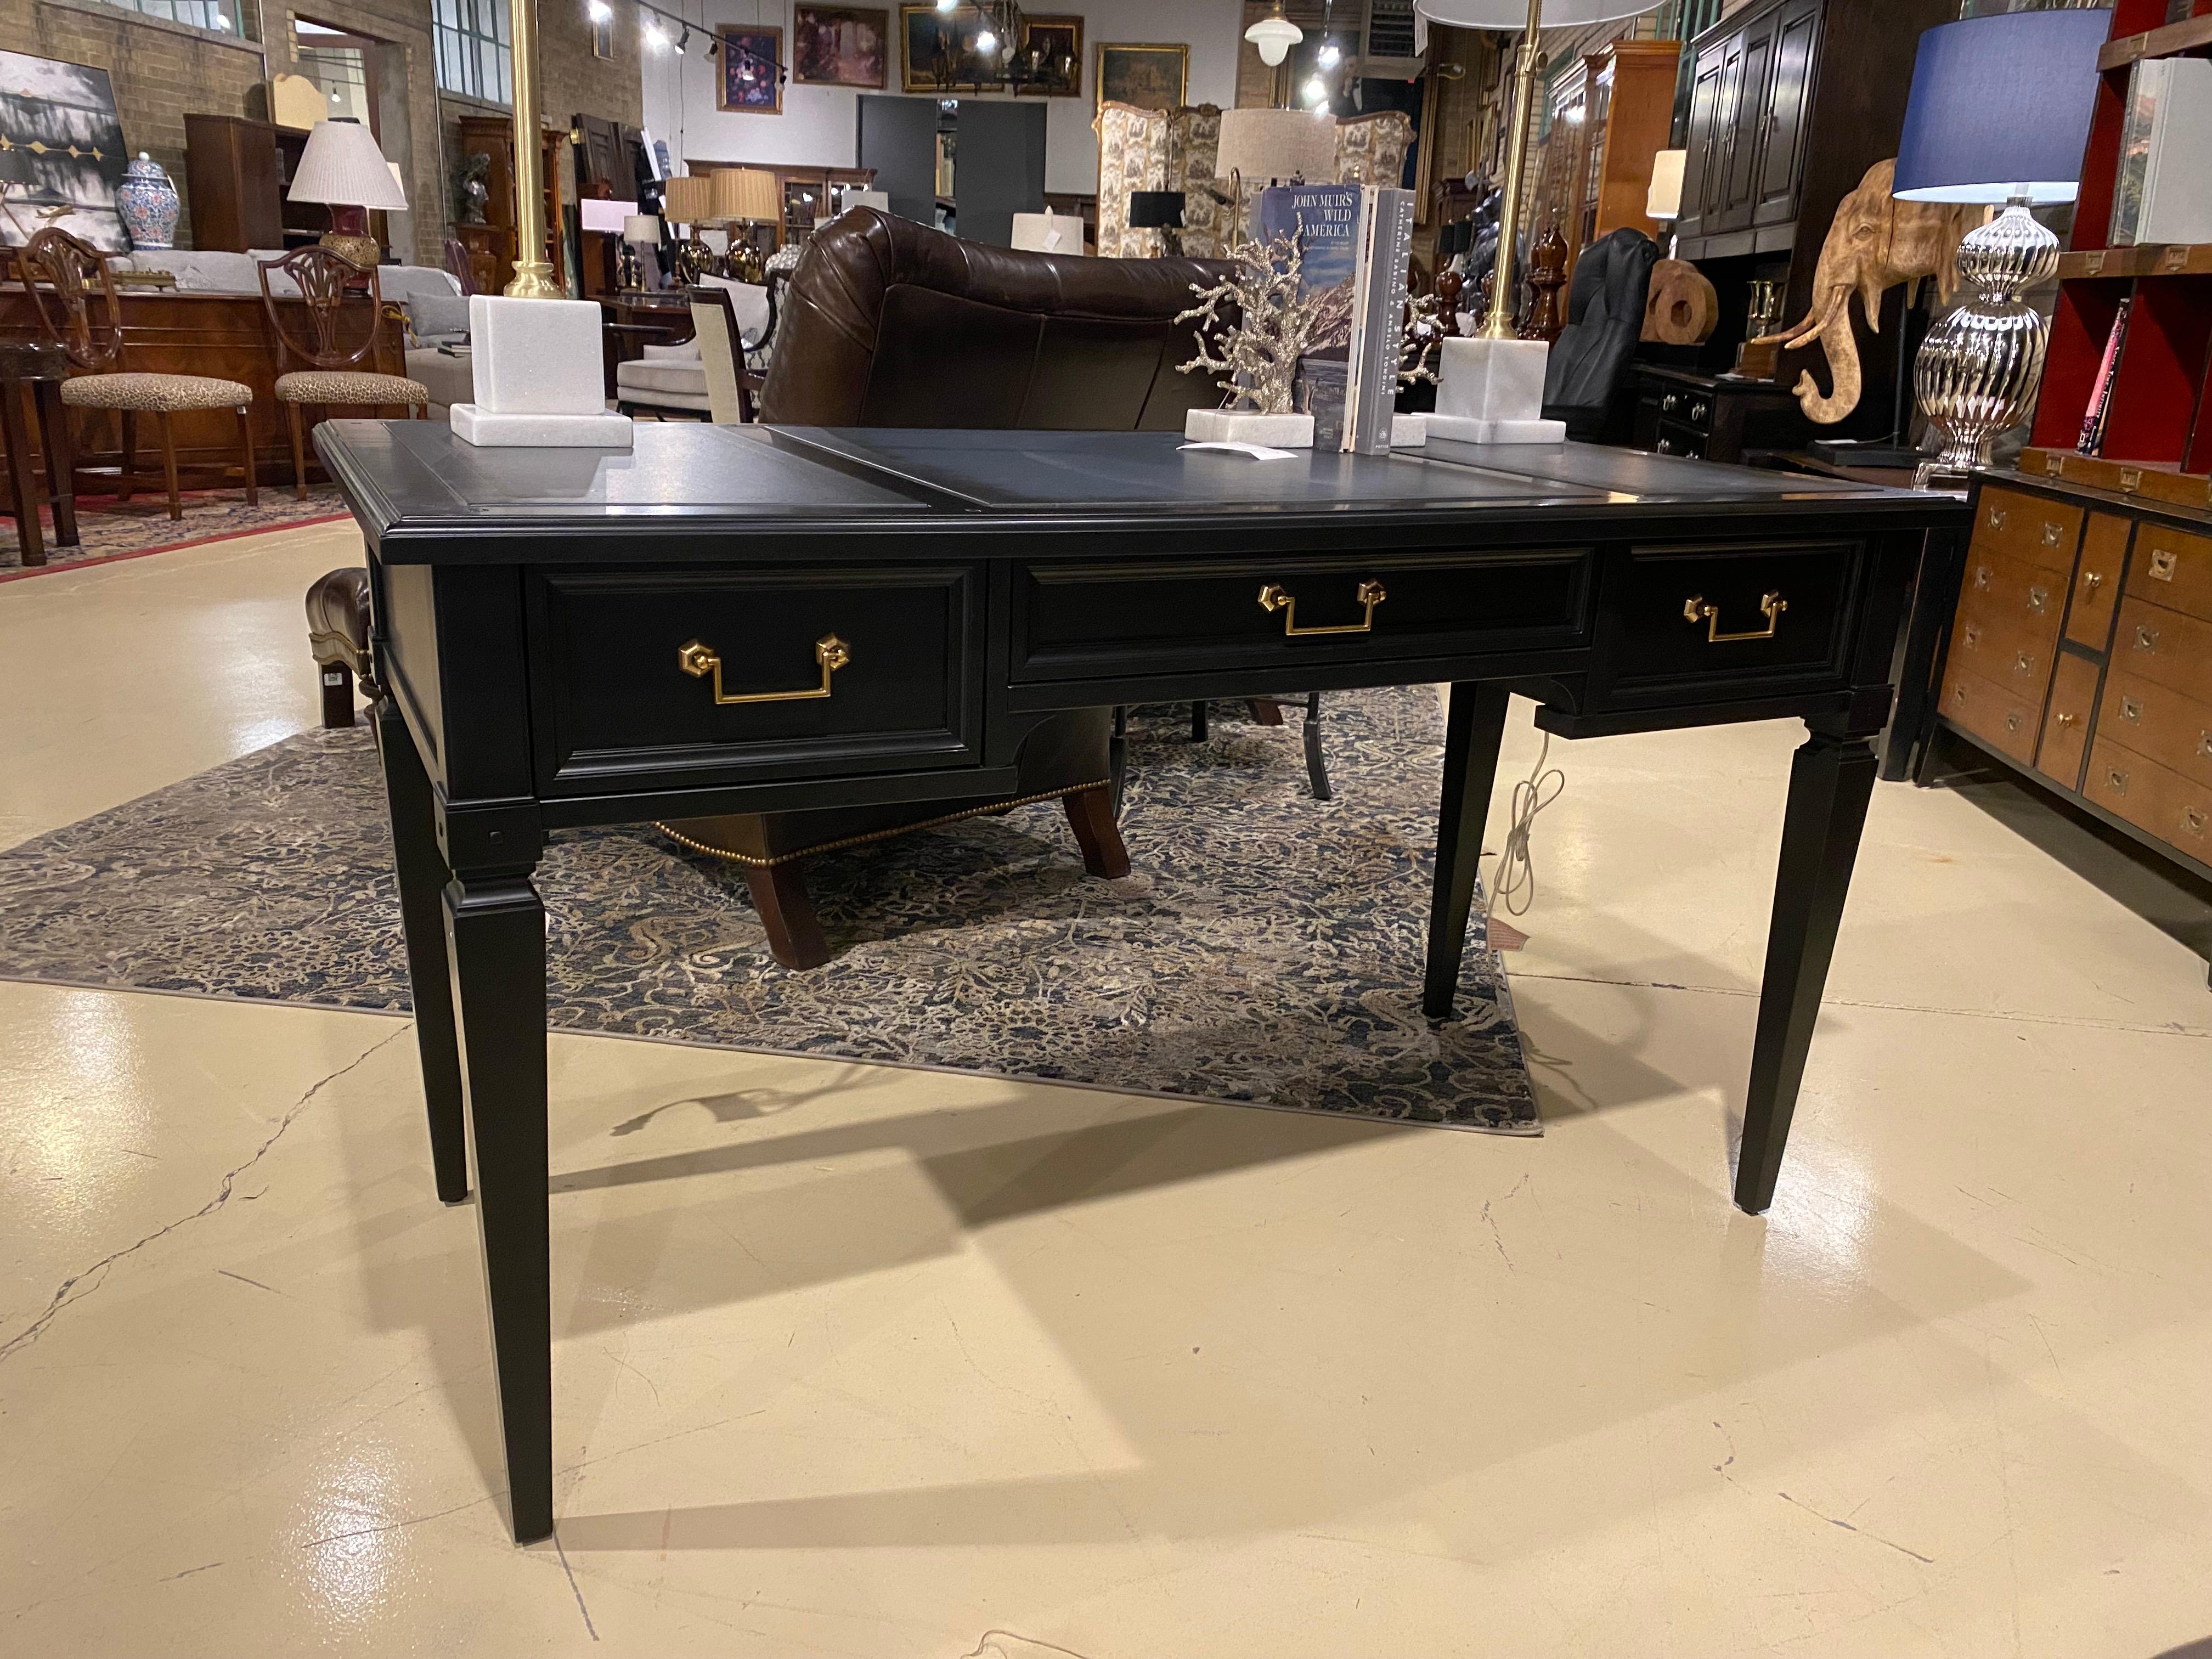 We present a beautifully finished desk made in Italy by Selva in cherry wood, with a leather writing surface. This item has been recently re-stained by our expert team in a black lacquer and accented with a grey leather writing surface, which also